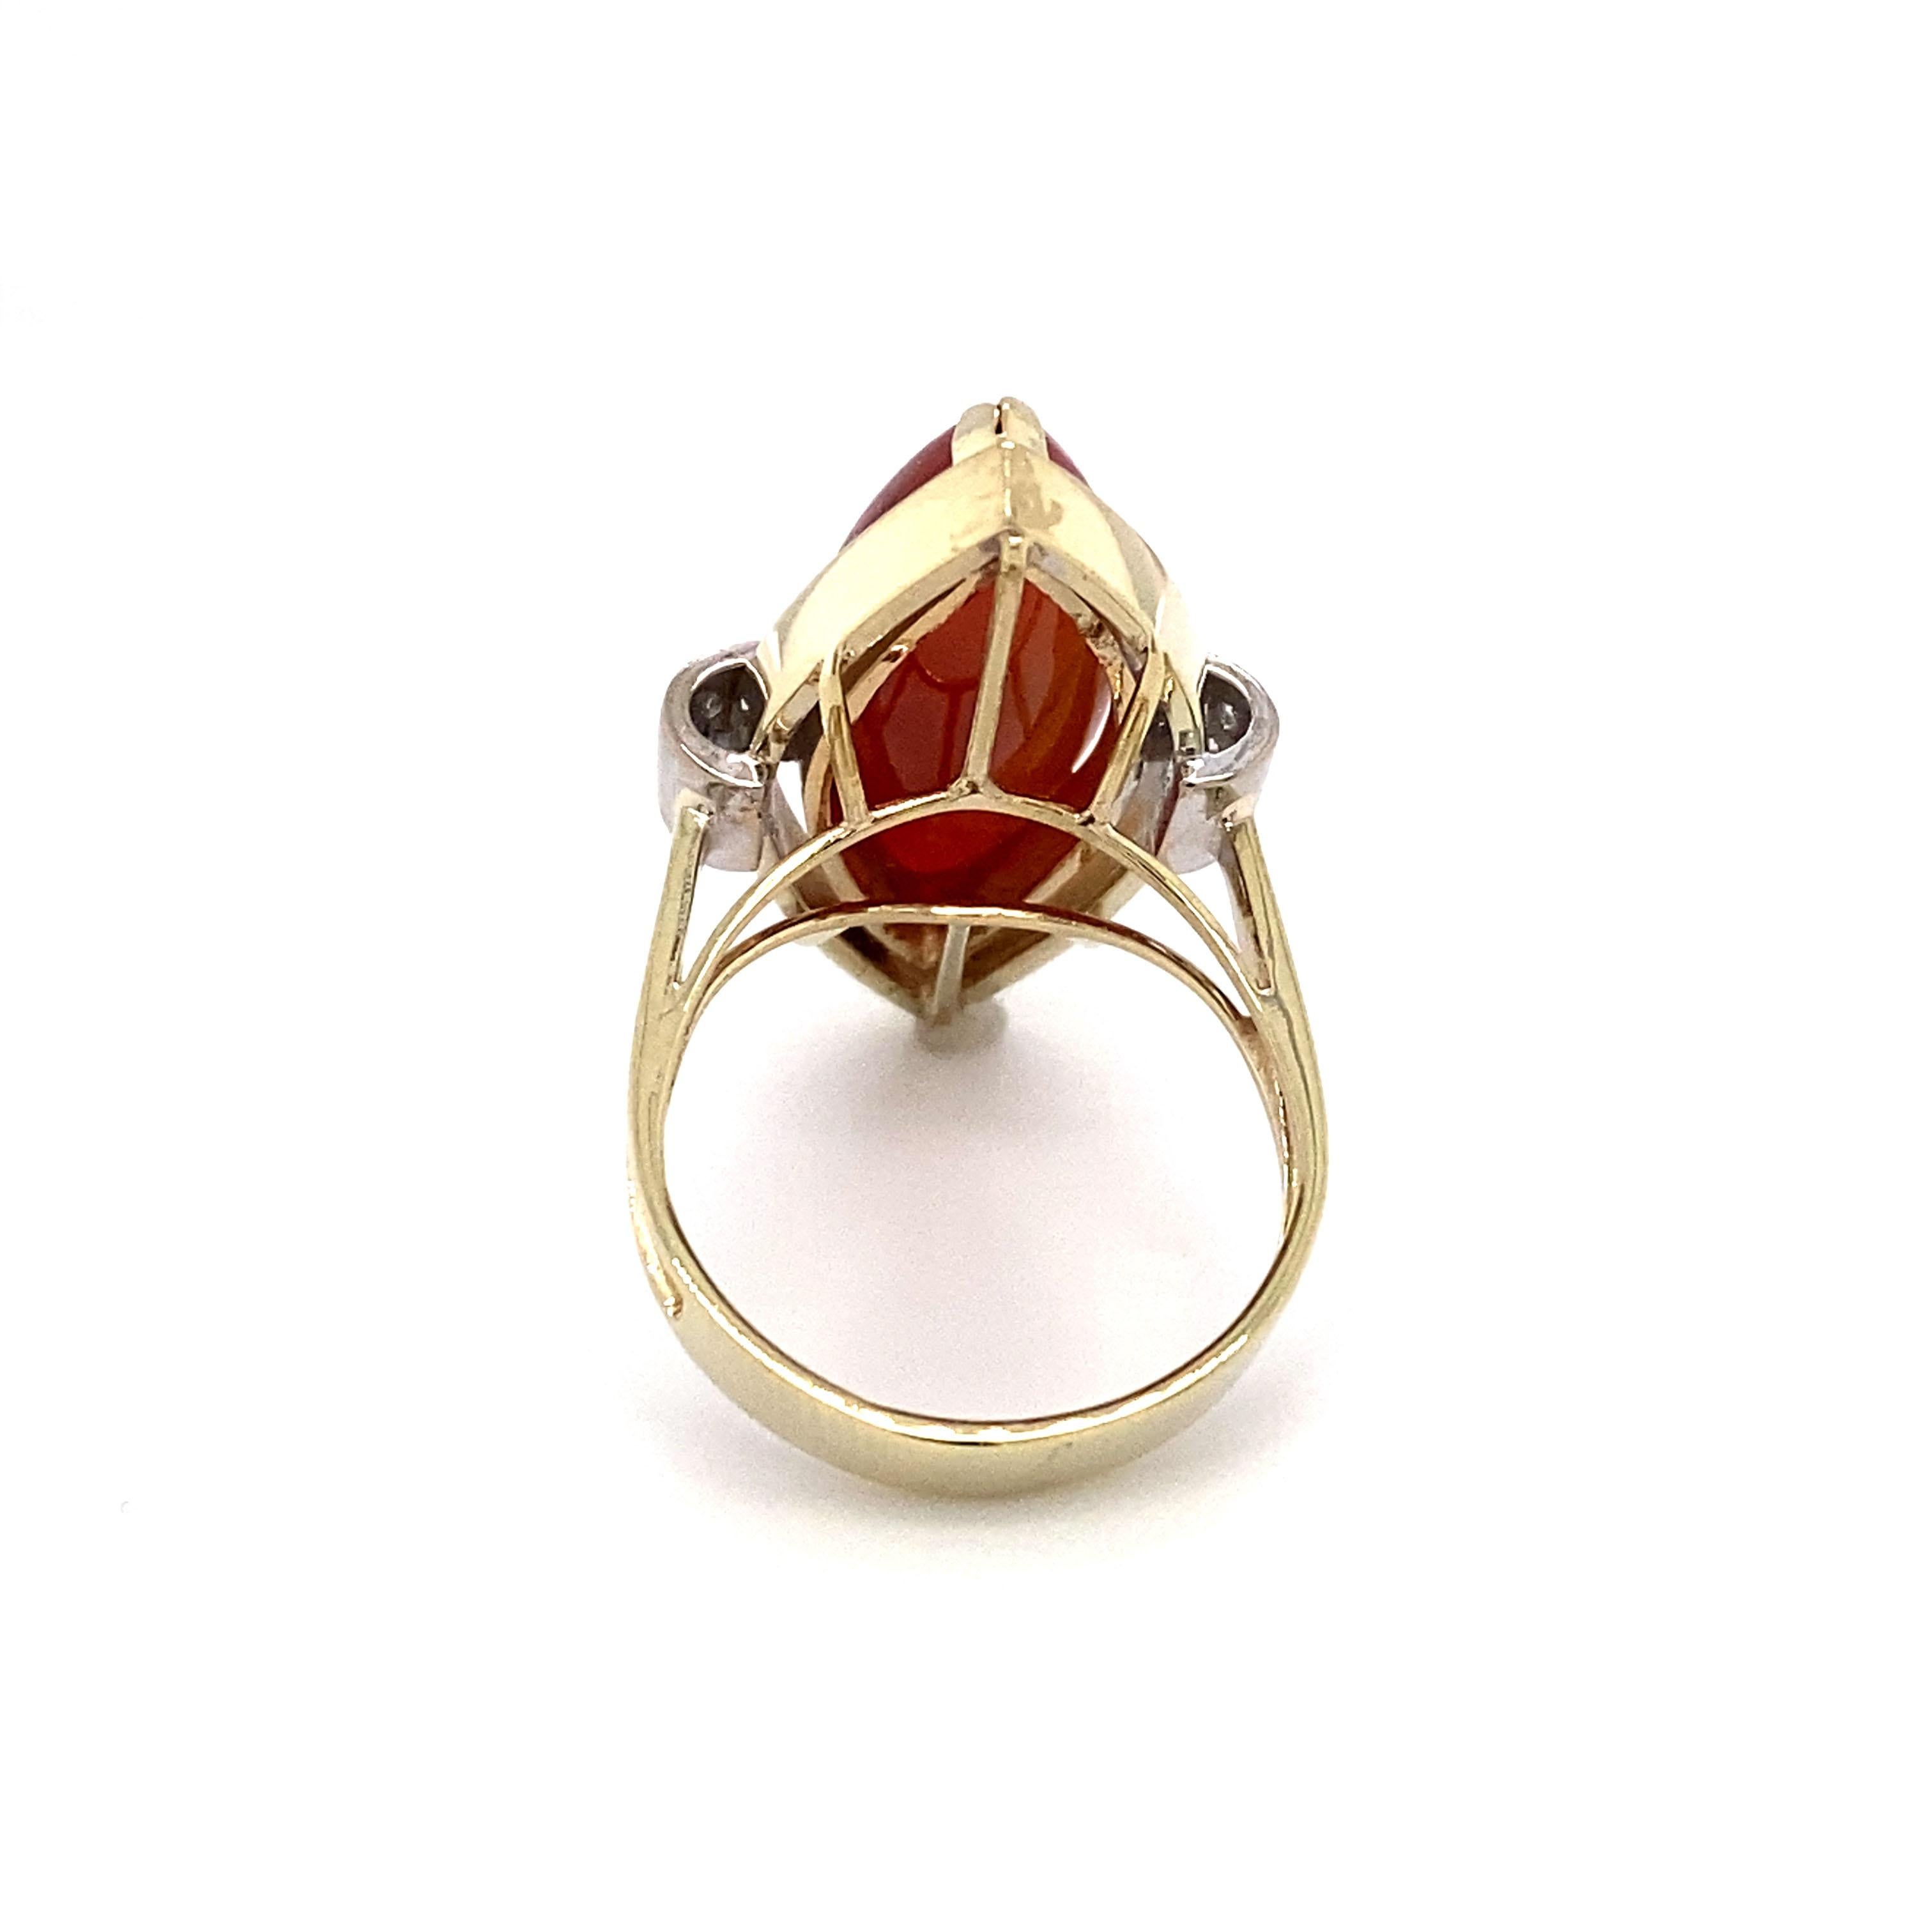 Circa: 1950s
Metal Type: 14K Gold
Size: US 6.5
Weight: 9.4g

Carnelian Details:

Cut: Marquise
Measurements: 20mm L
Color: Rosy brown with a hint of orange